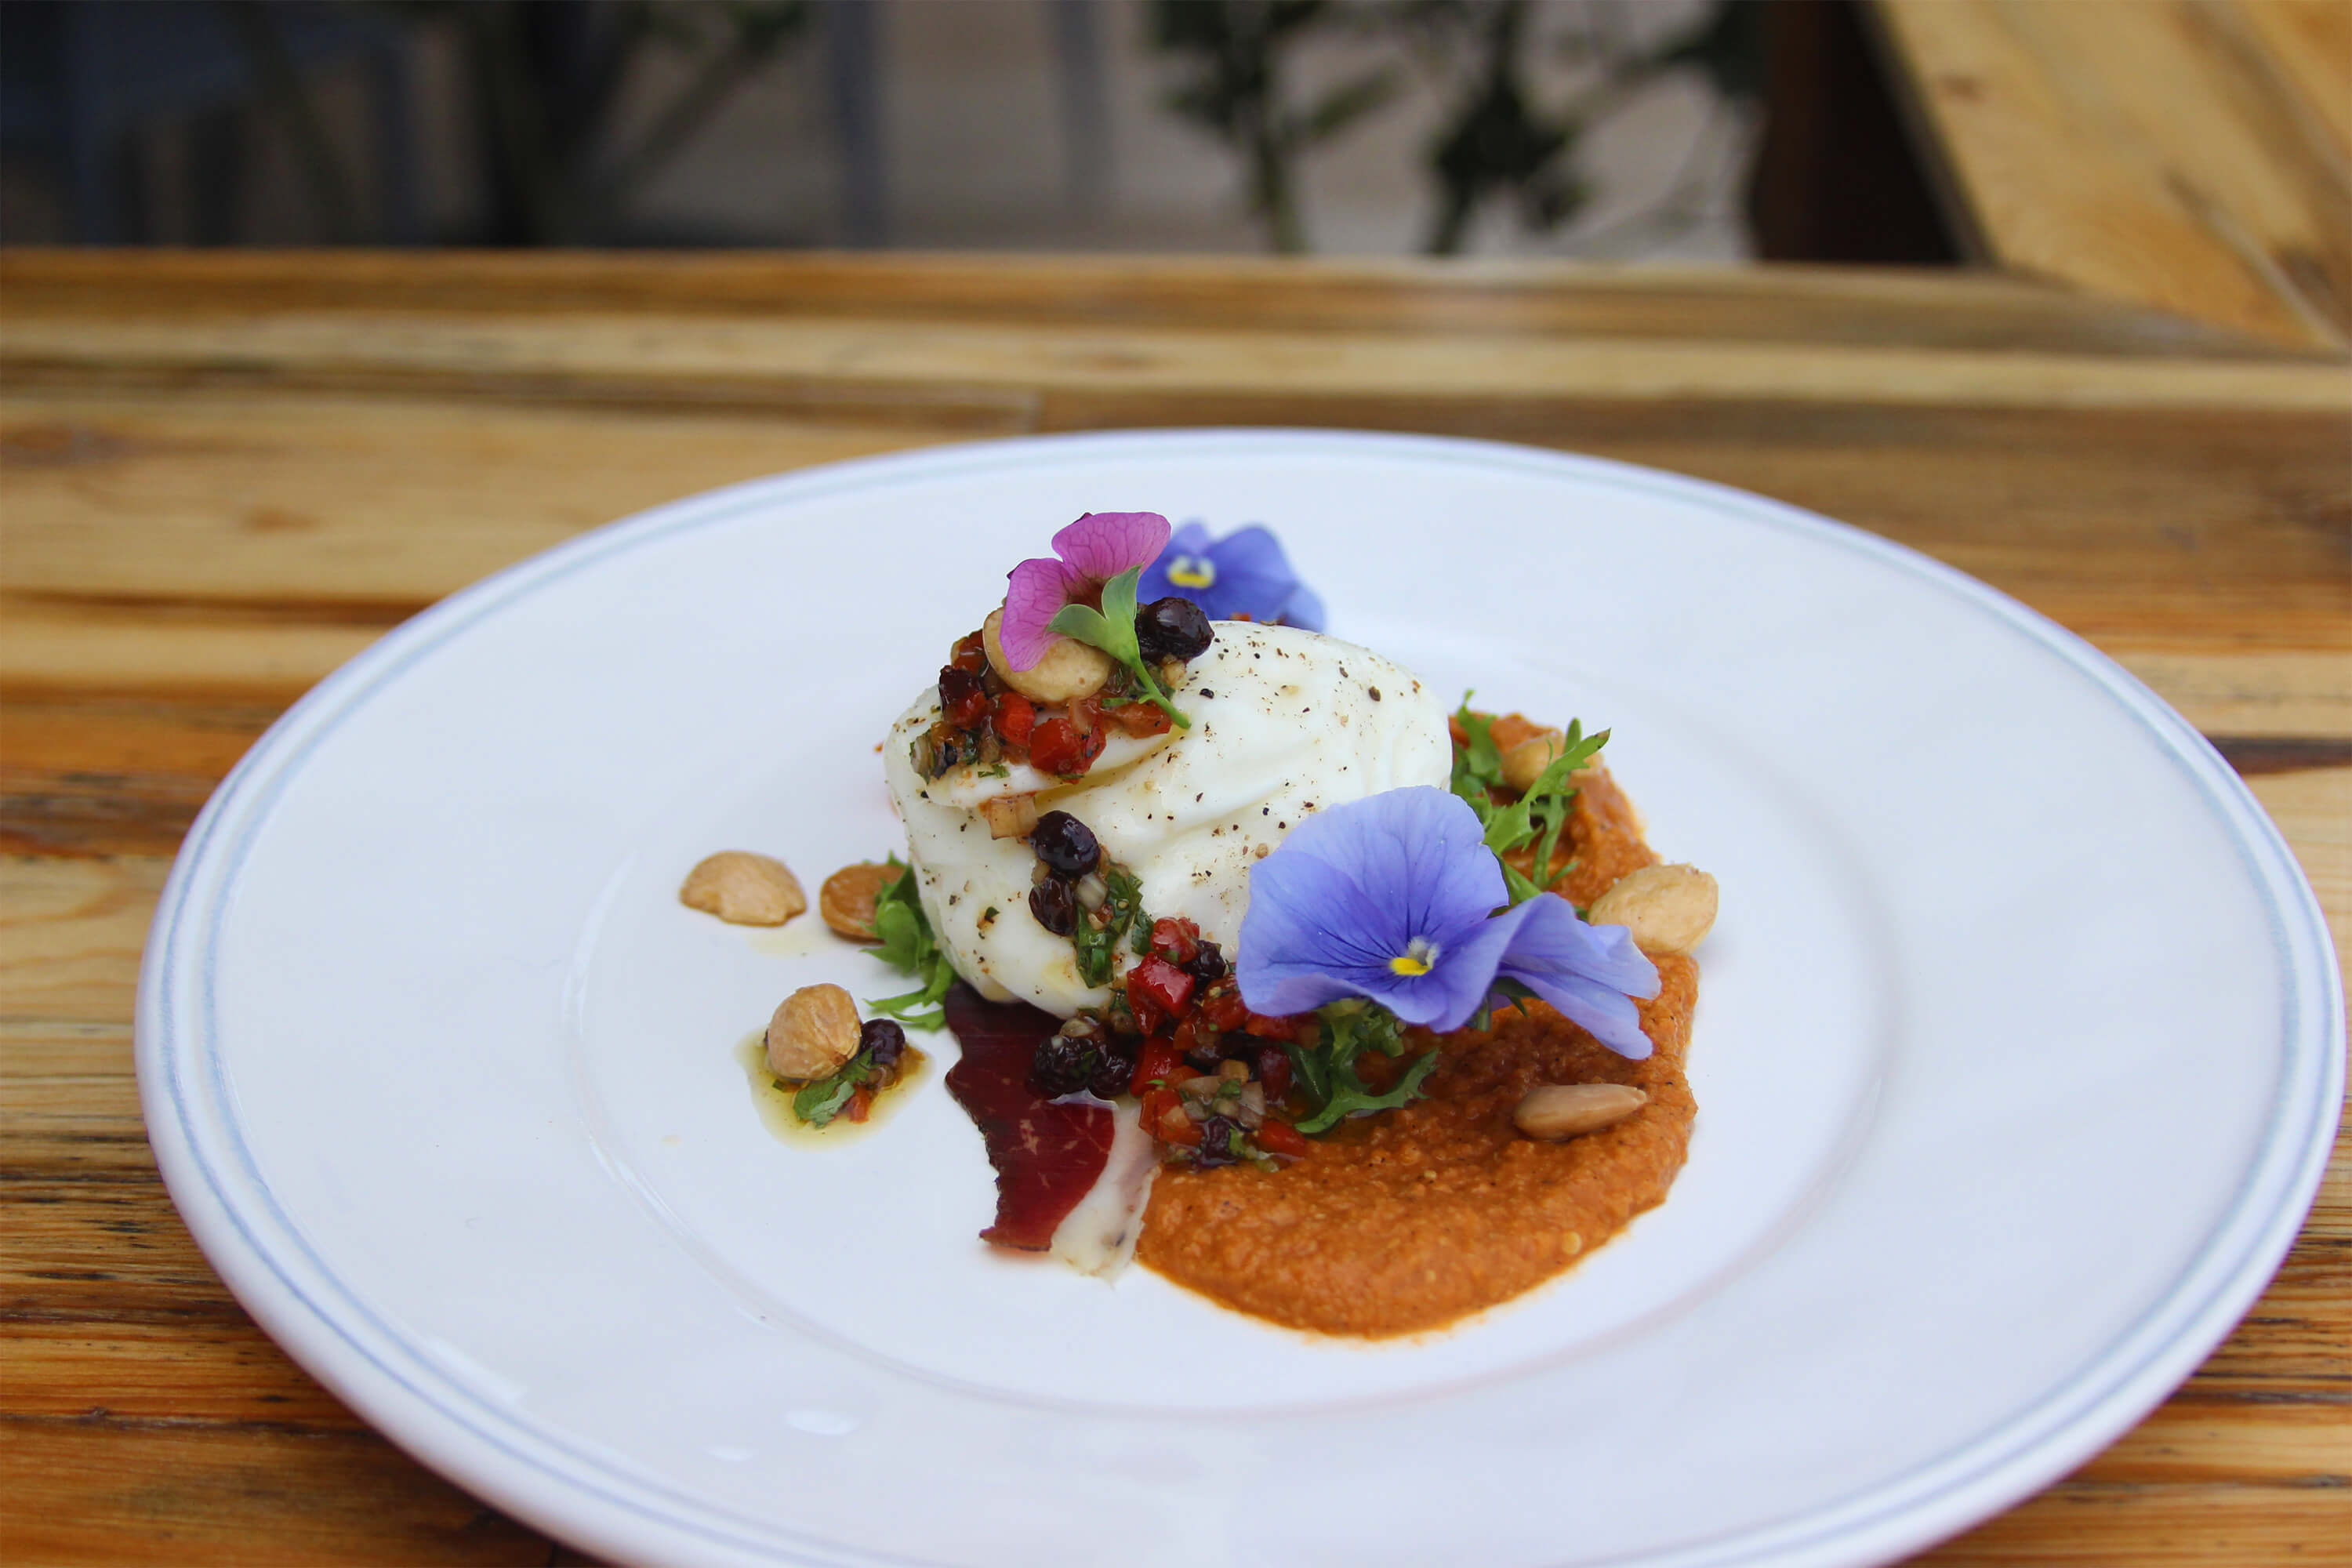 burrata plate with edible flowers from the garden and seasonal accompaniments